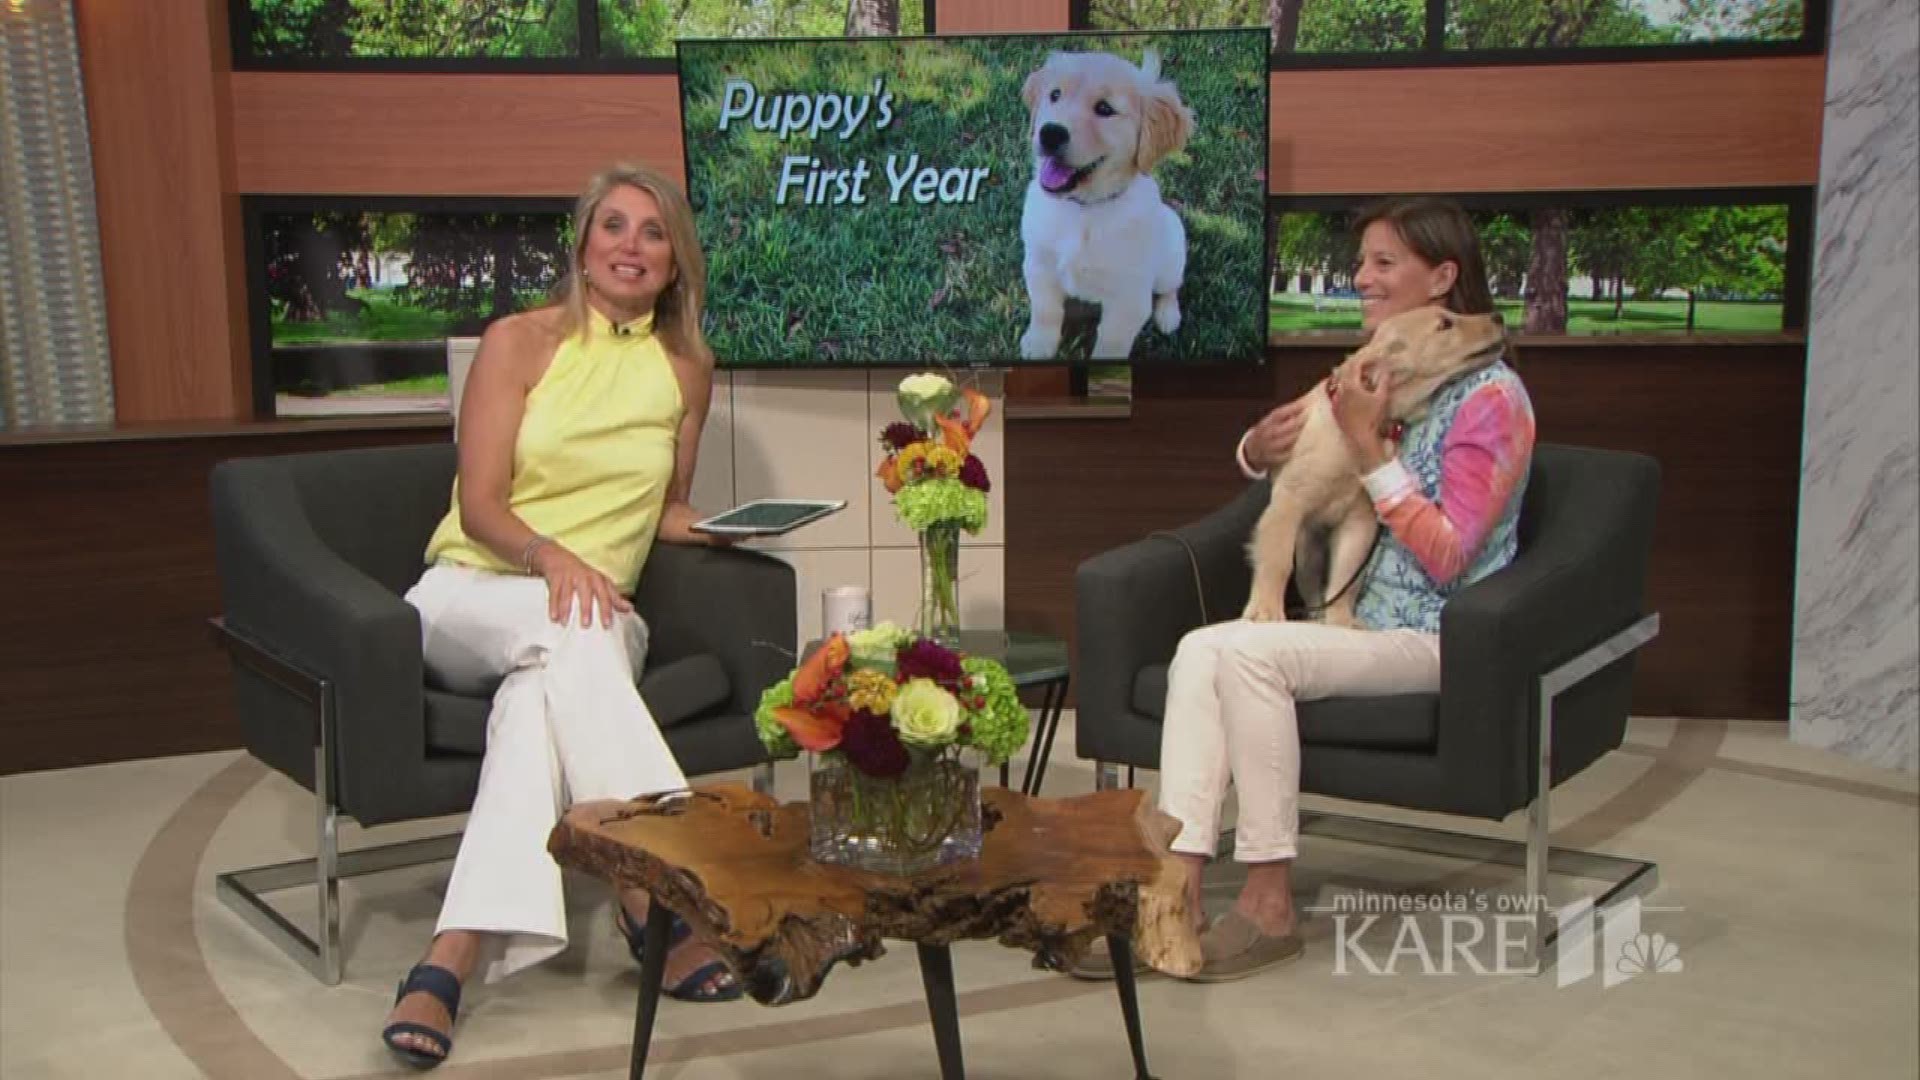 Dog trainer Kathryn Newman and Poppy give tips on a puppy's first year.